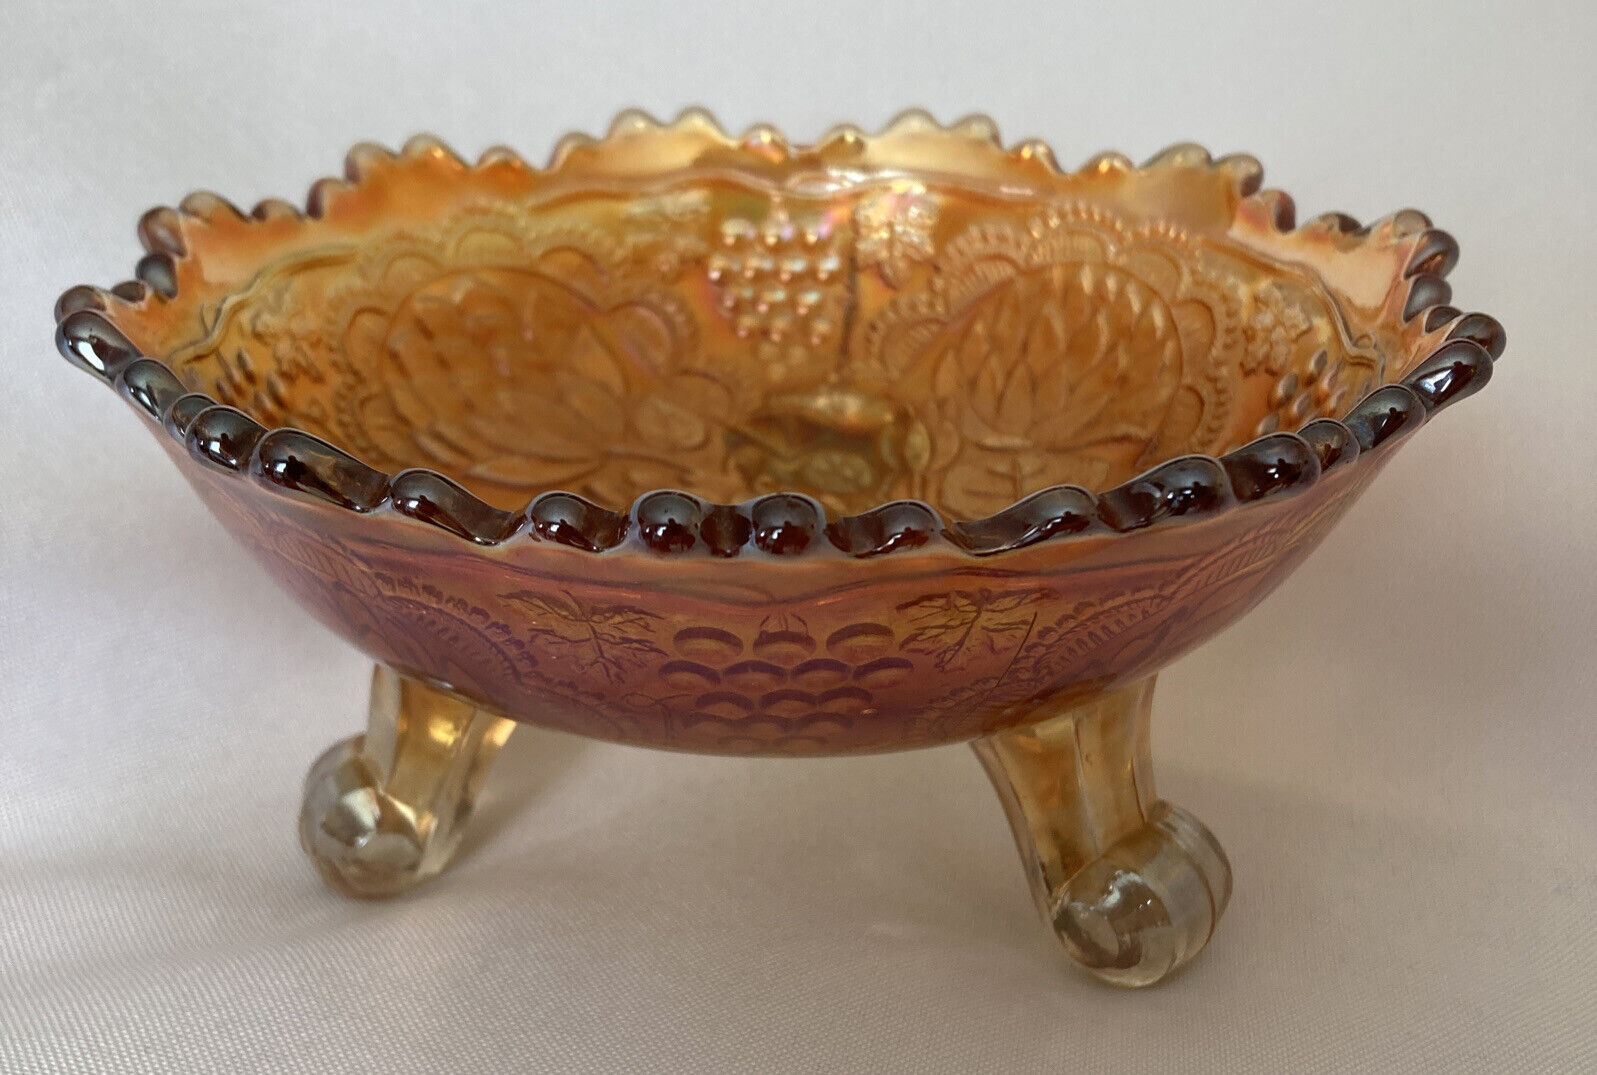 Fenton Lotus and Grape Bowl Three-Footed Antique Marigold Carnival Glass